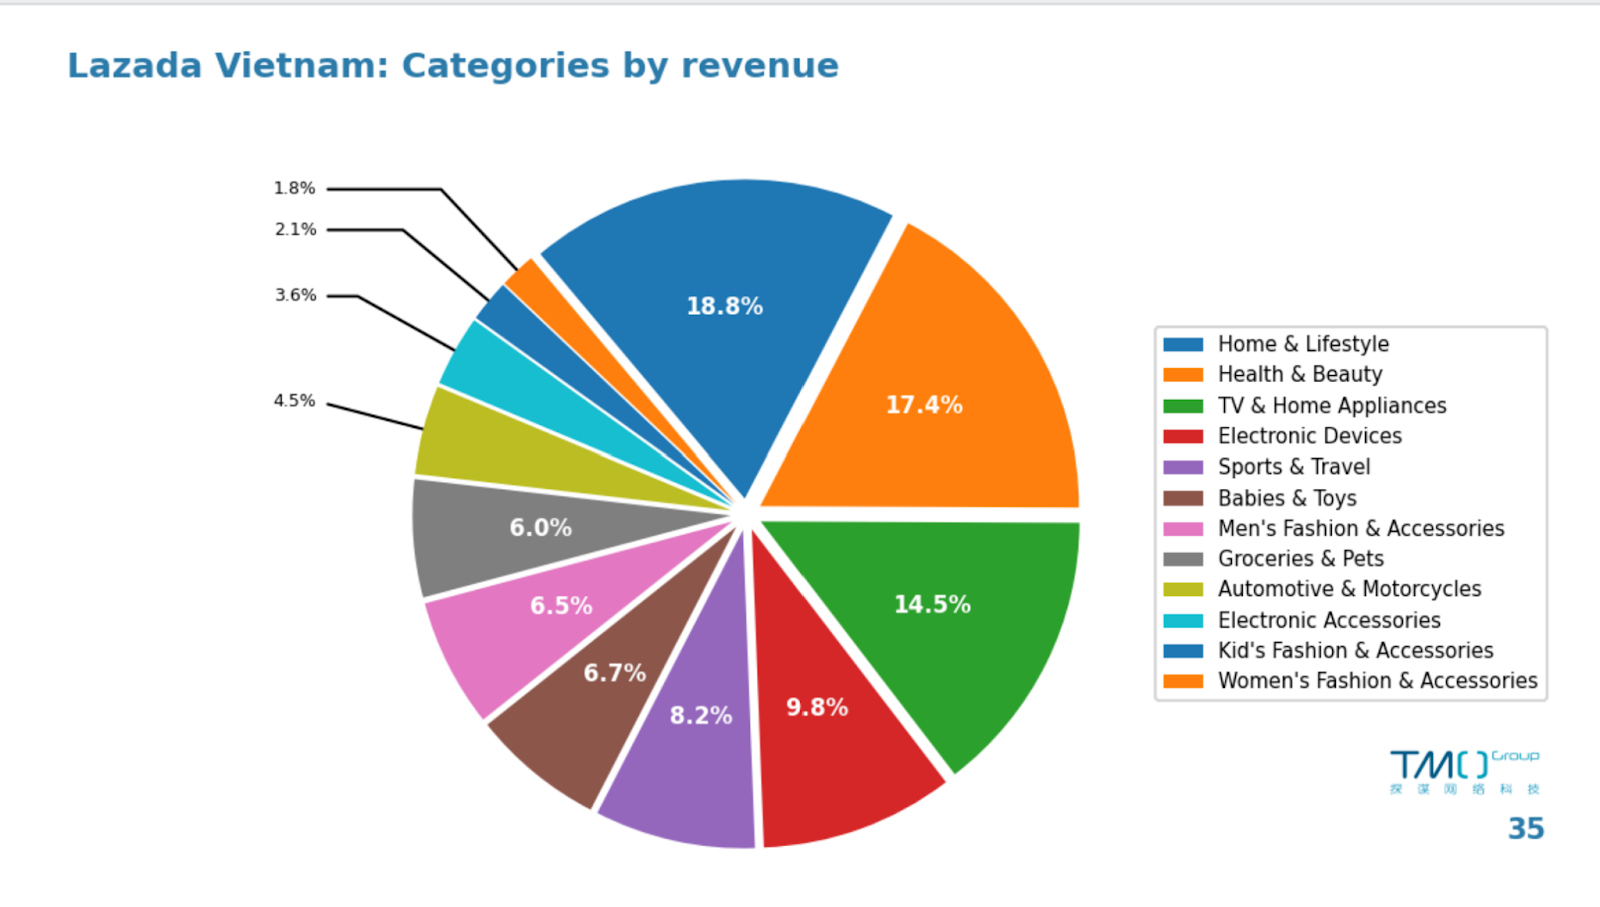 Lazada categories by revenue (Source: TMA group)